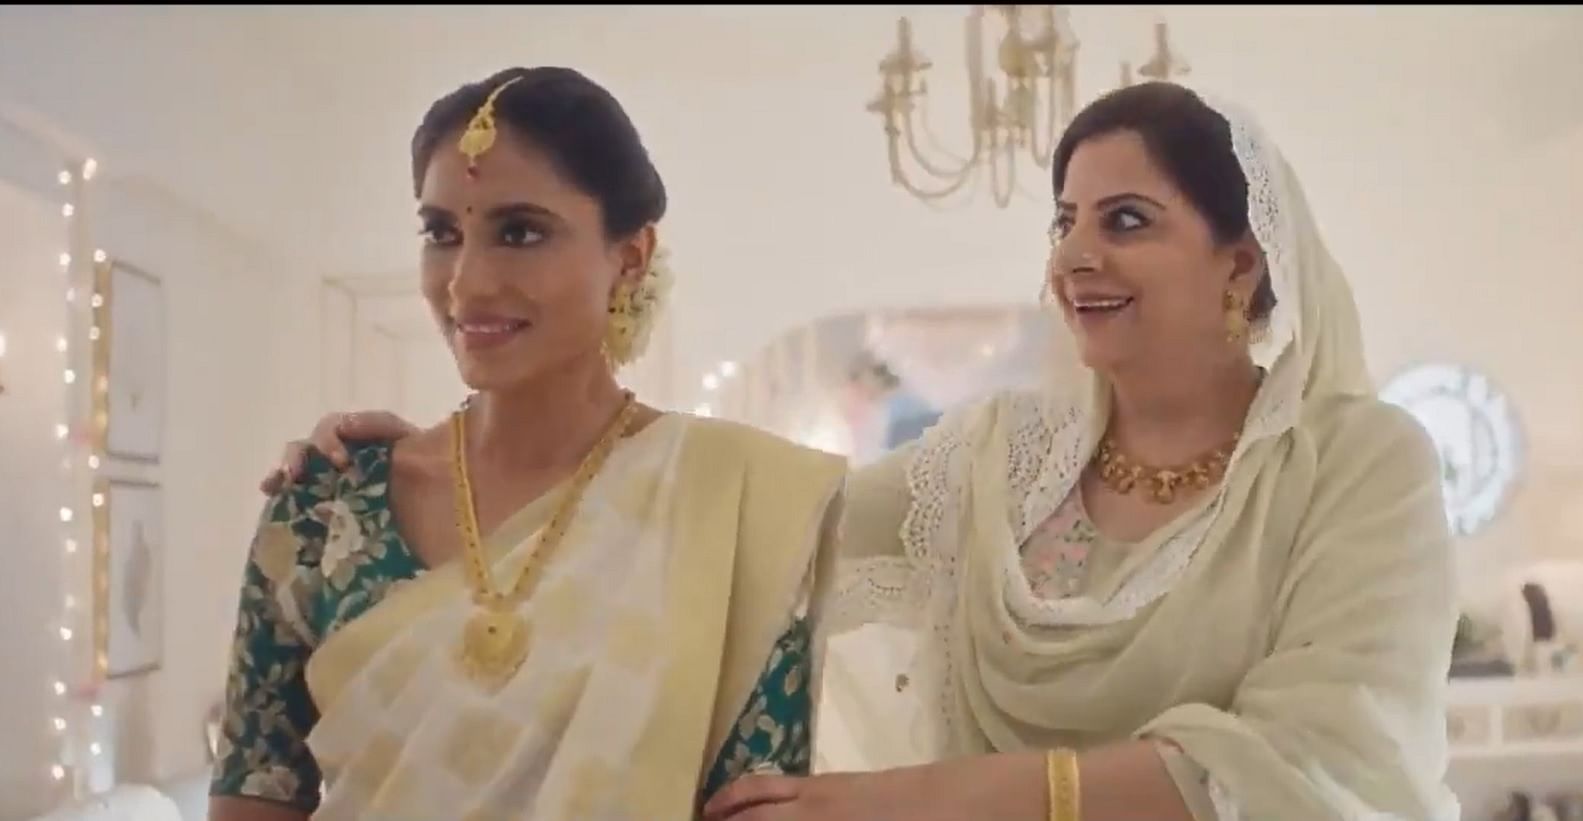 The advertisement released and withdrawn by Tanishq shows a Muslim family hosting a baby shower for their Hindu daughter-in-law.